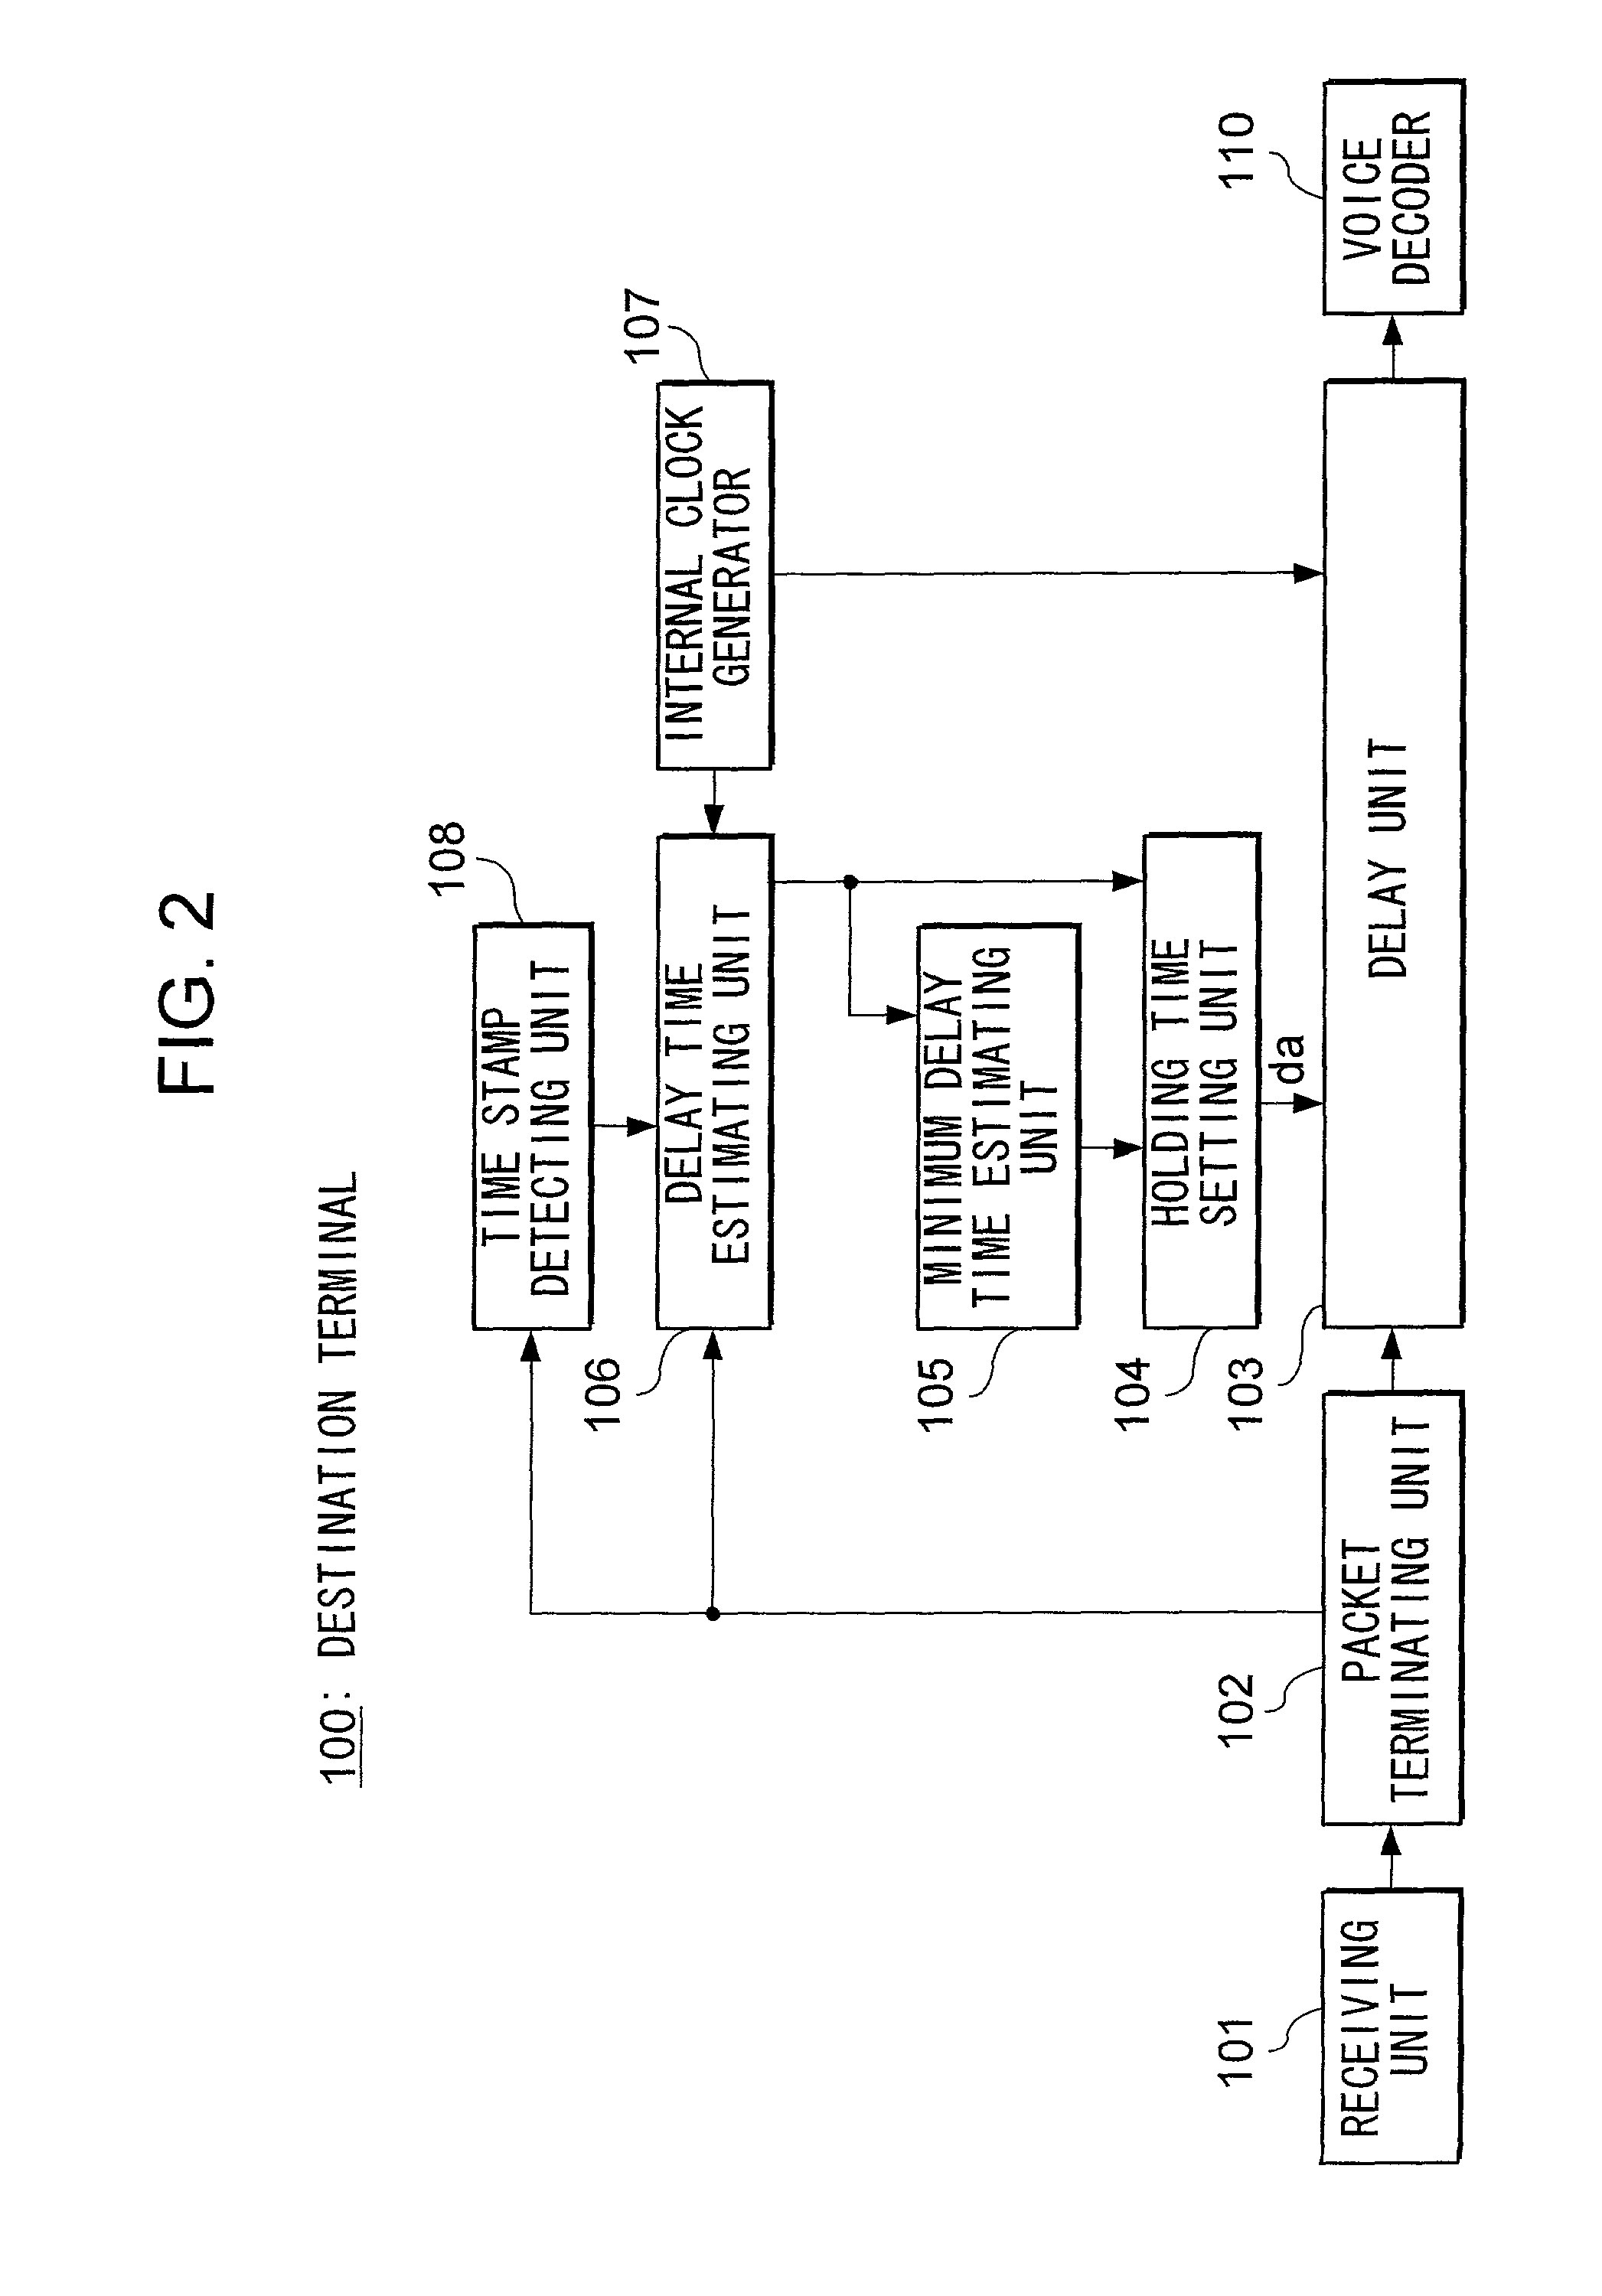 Device and method for reducing delay jitter in data transmission